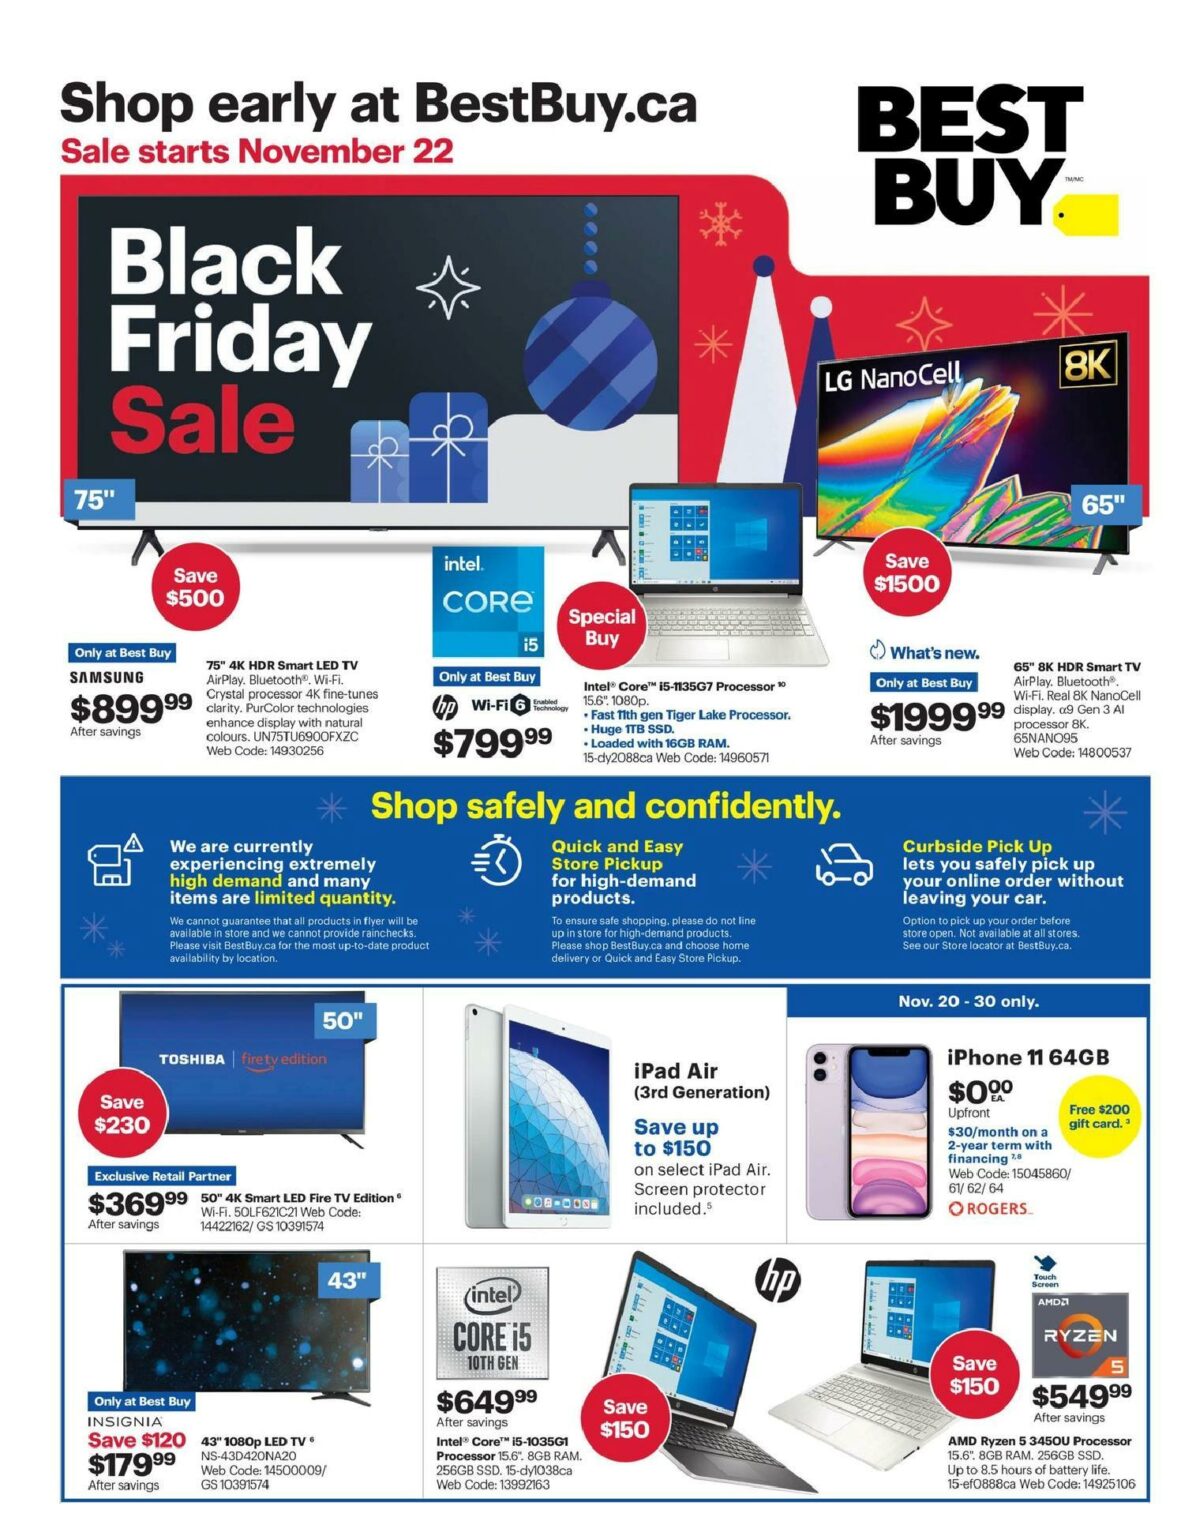 Best Buy Black Friday Flyer Deals 2020 Canada - How To Search For Black Friday Deals